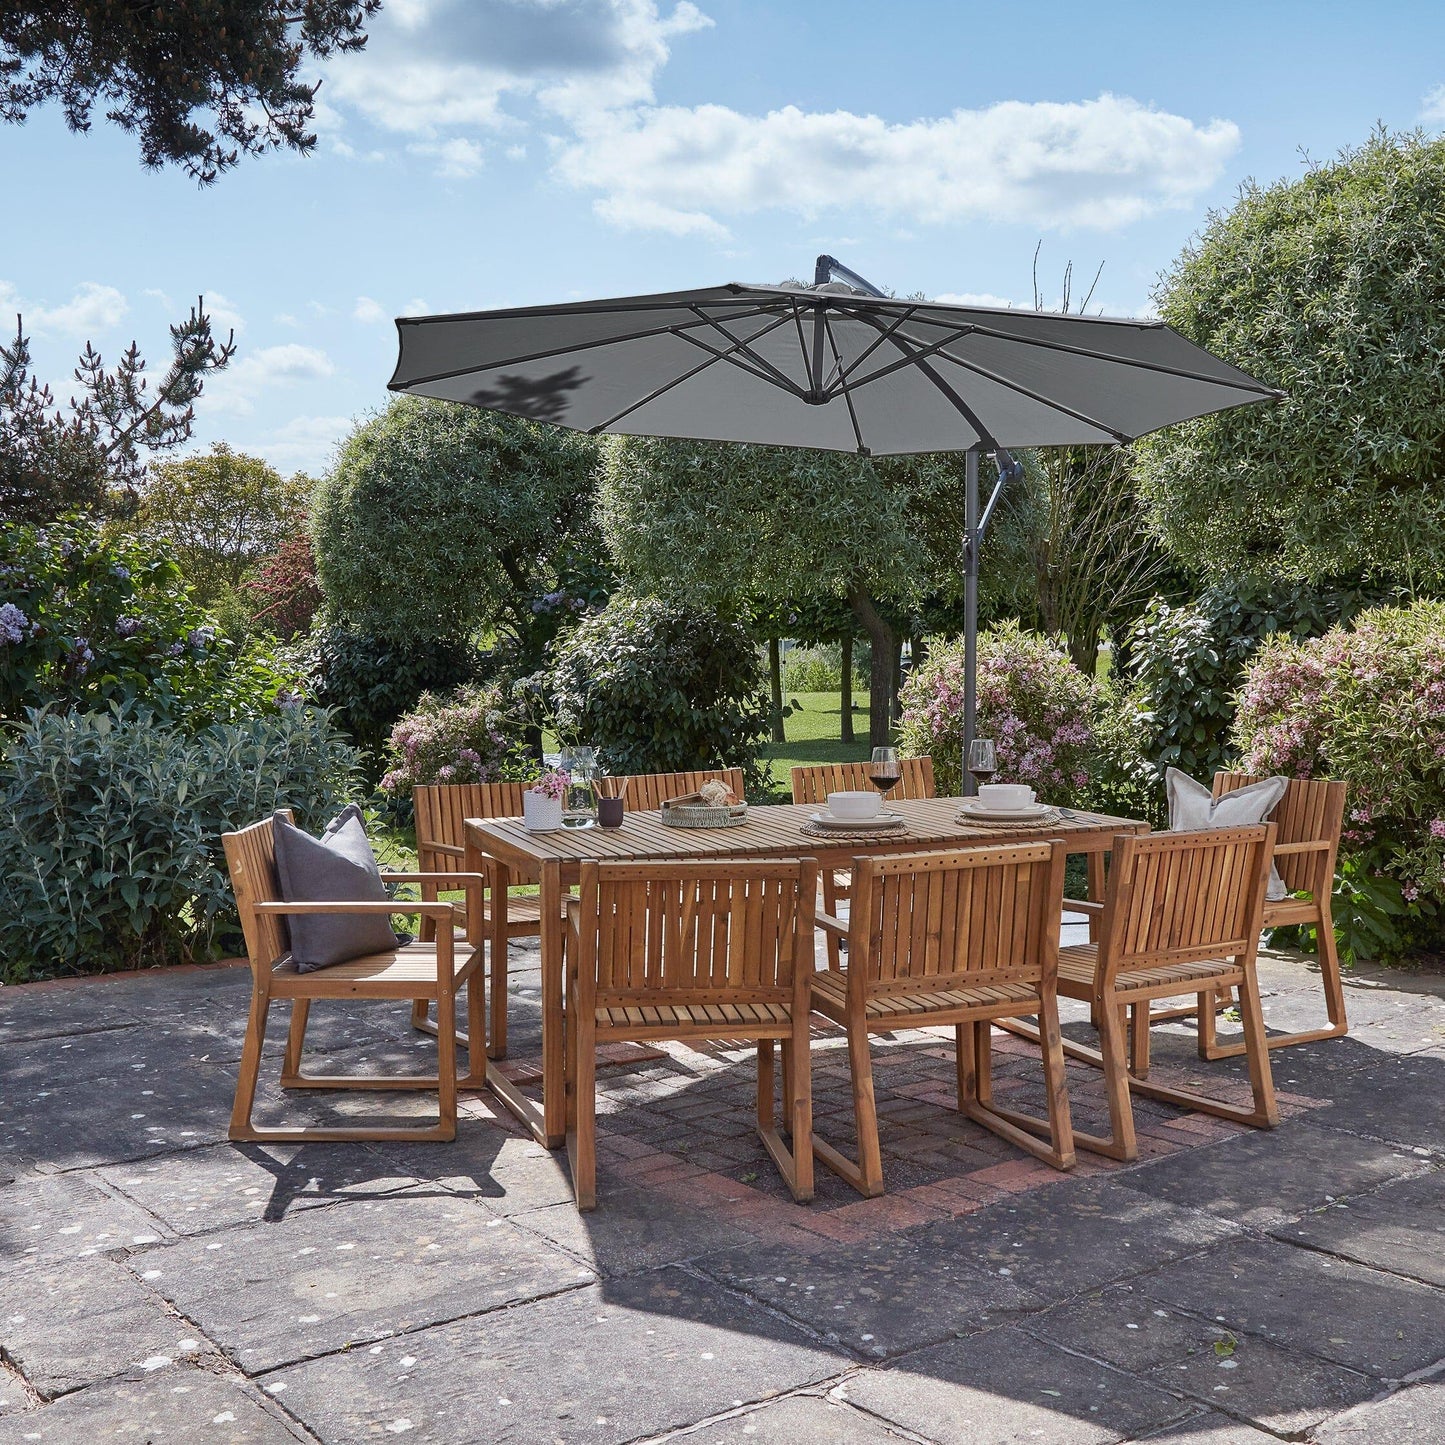 Lennox 8 Seater Wooden Outdoor Dining Set with Grey Parasol